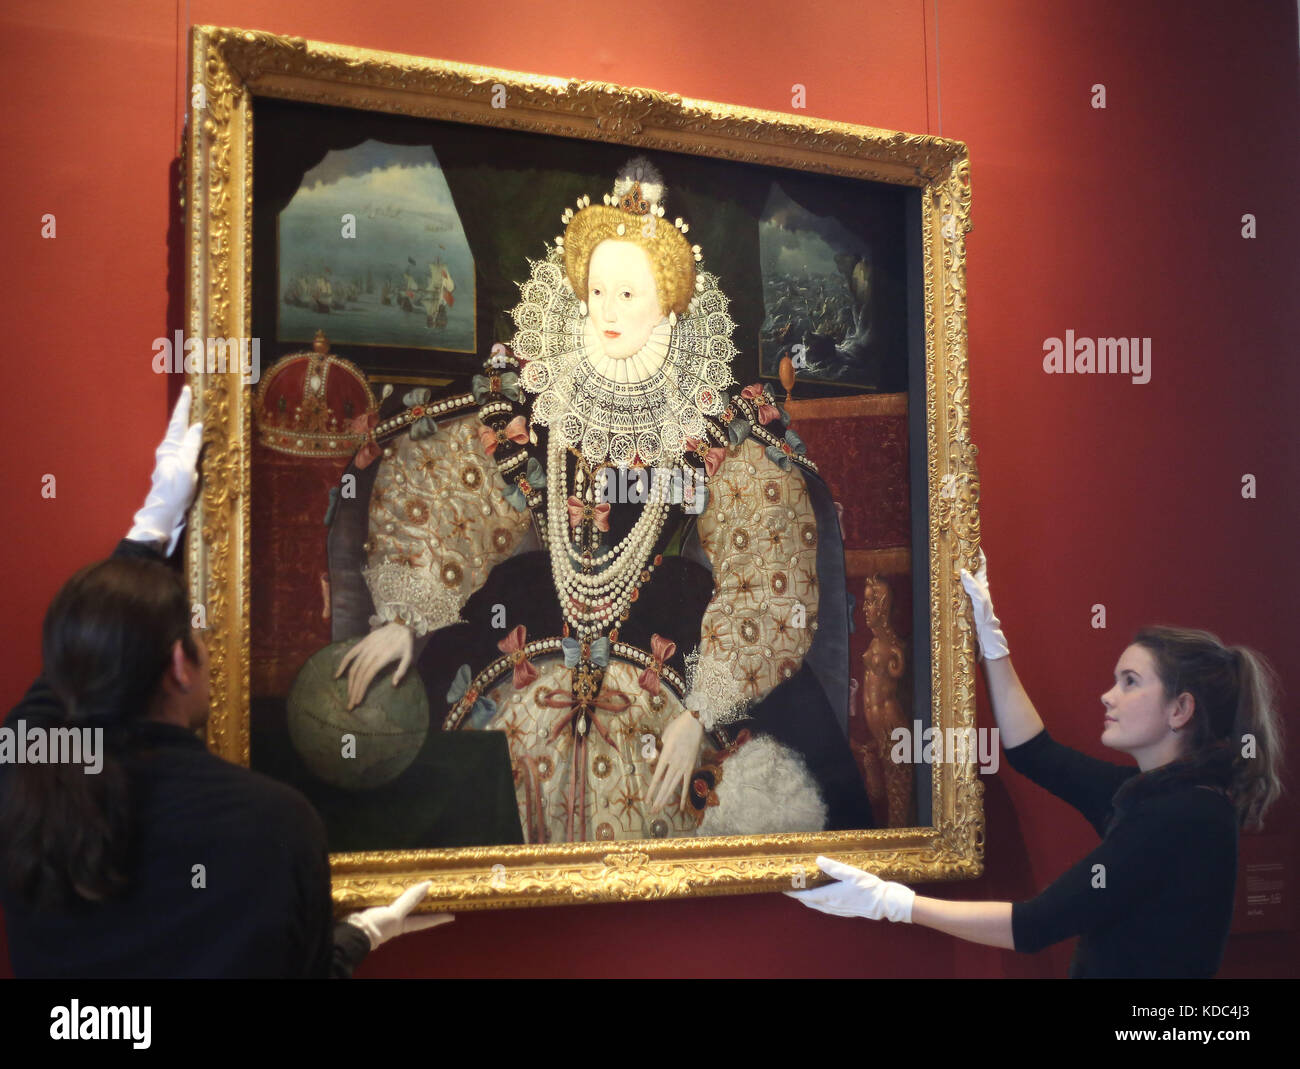 Art handlers reinstall the Armada Portrait of Elizabeth I in the Queen’s House, Royal Museums Greenwich, London, following conservation work. Stock Photo